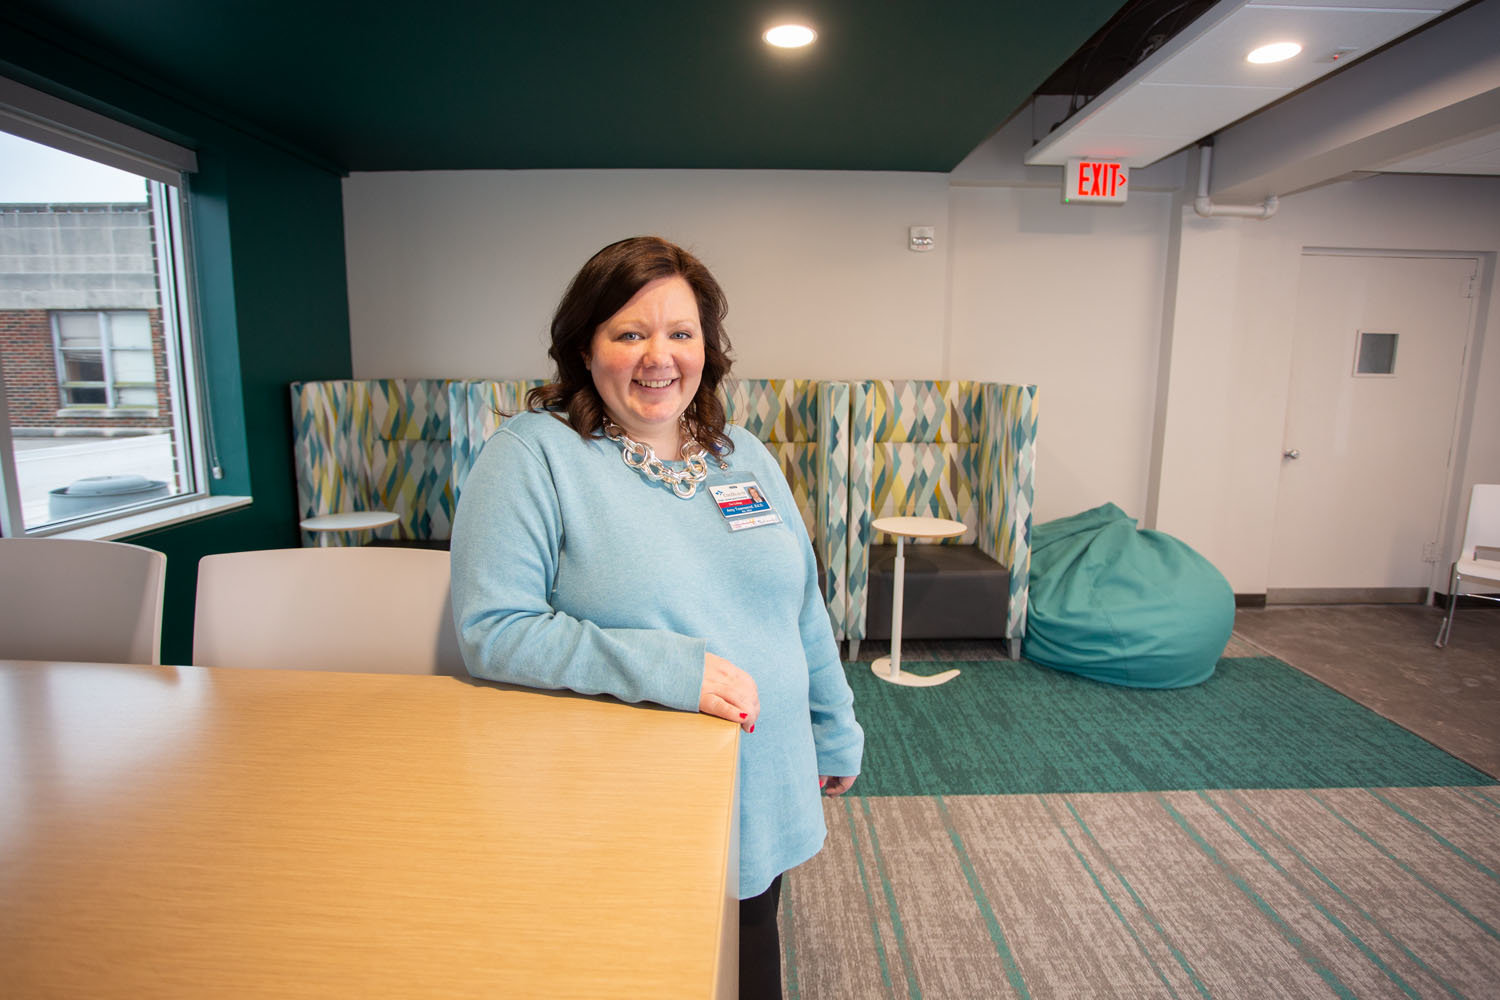 Cox College Chief Nursing Administrator Amy Townsend stands in a student lounge, part of $6.6 million in renovation work at the school set to conclude this month.